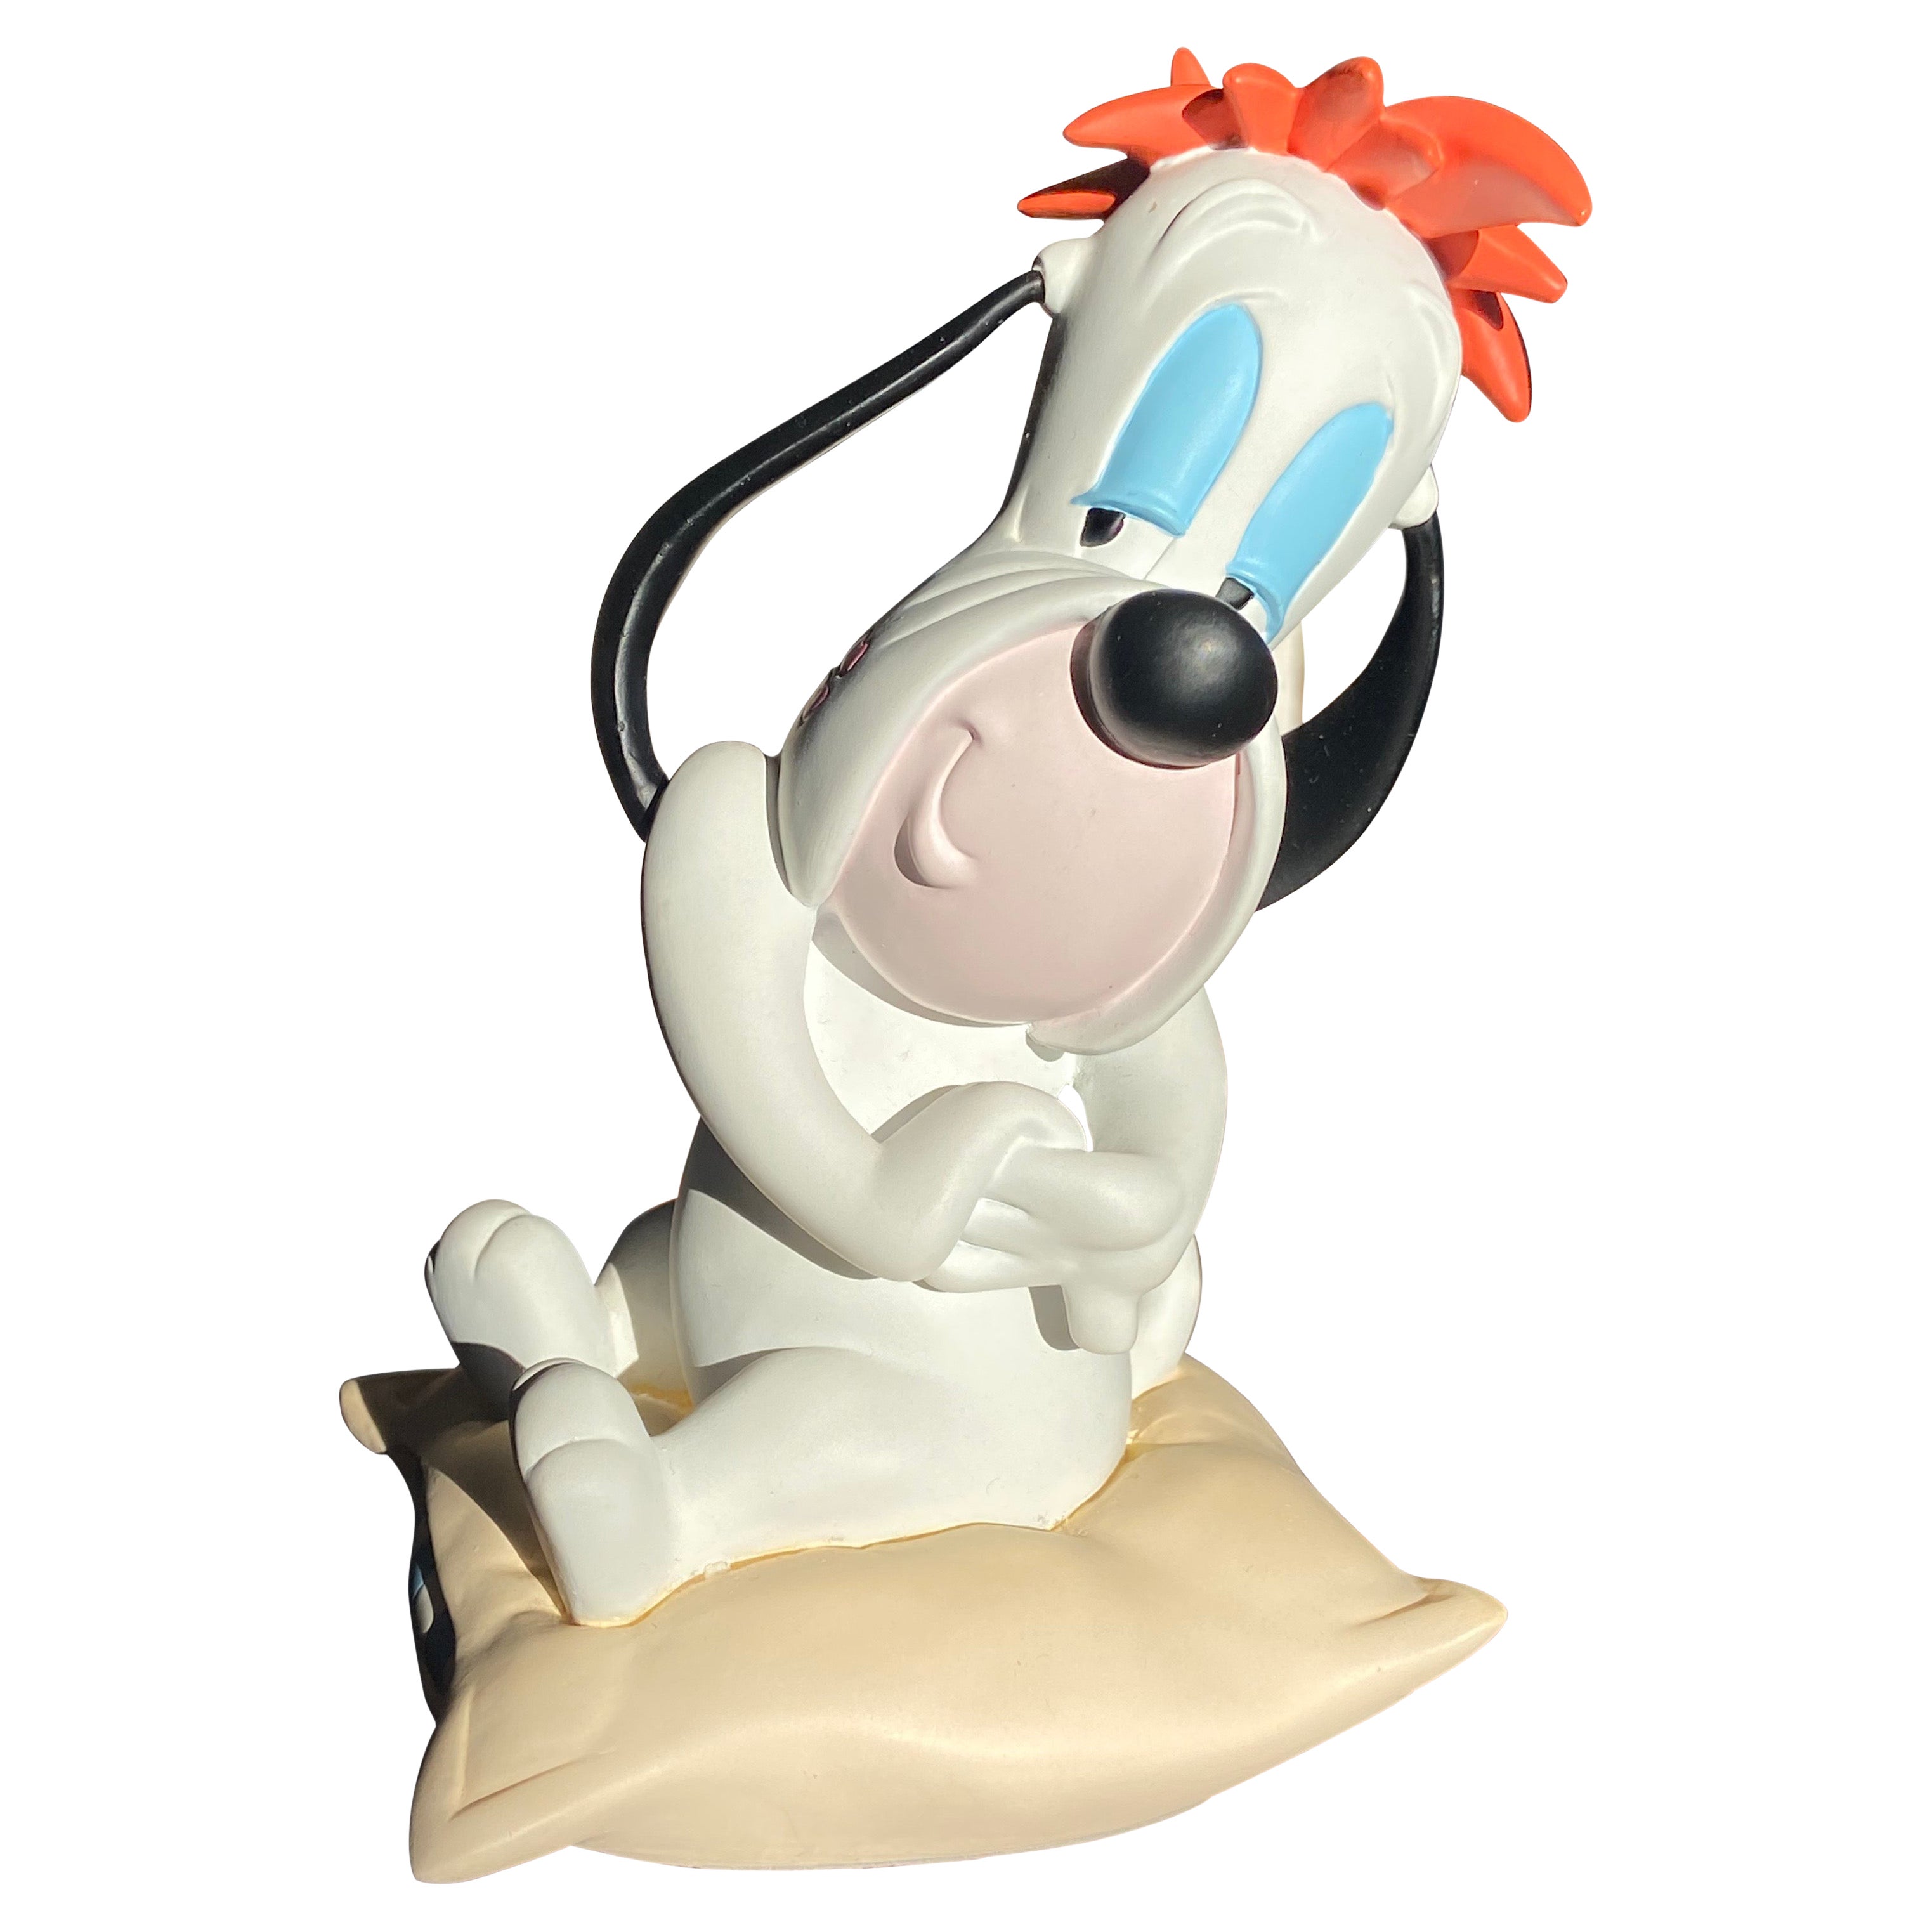 Rare and Collectable Droopy on a Cushion by Demons & Merveilles Figurine Statue For Sale